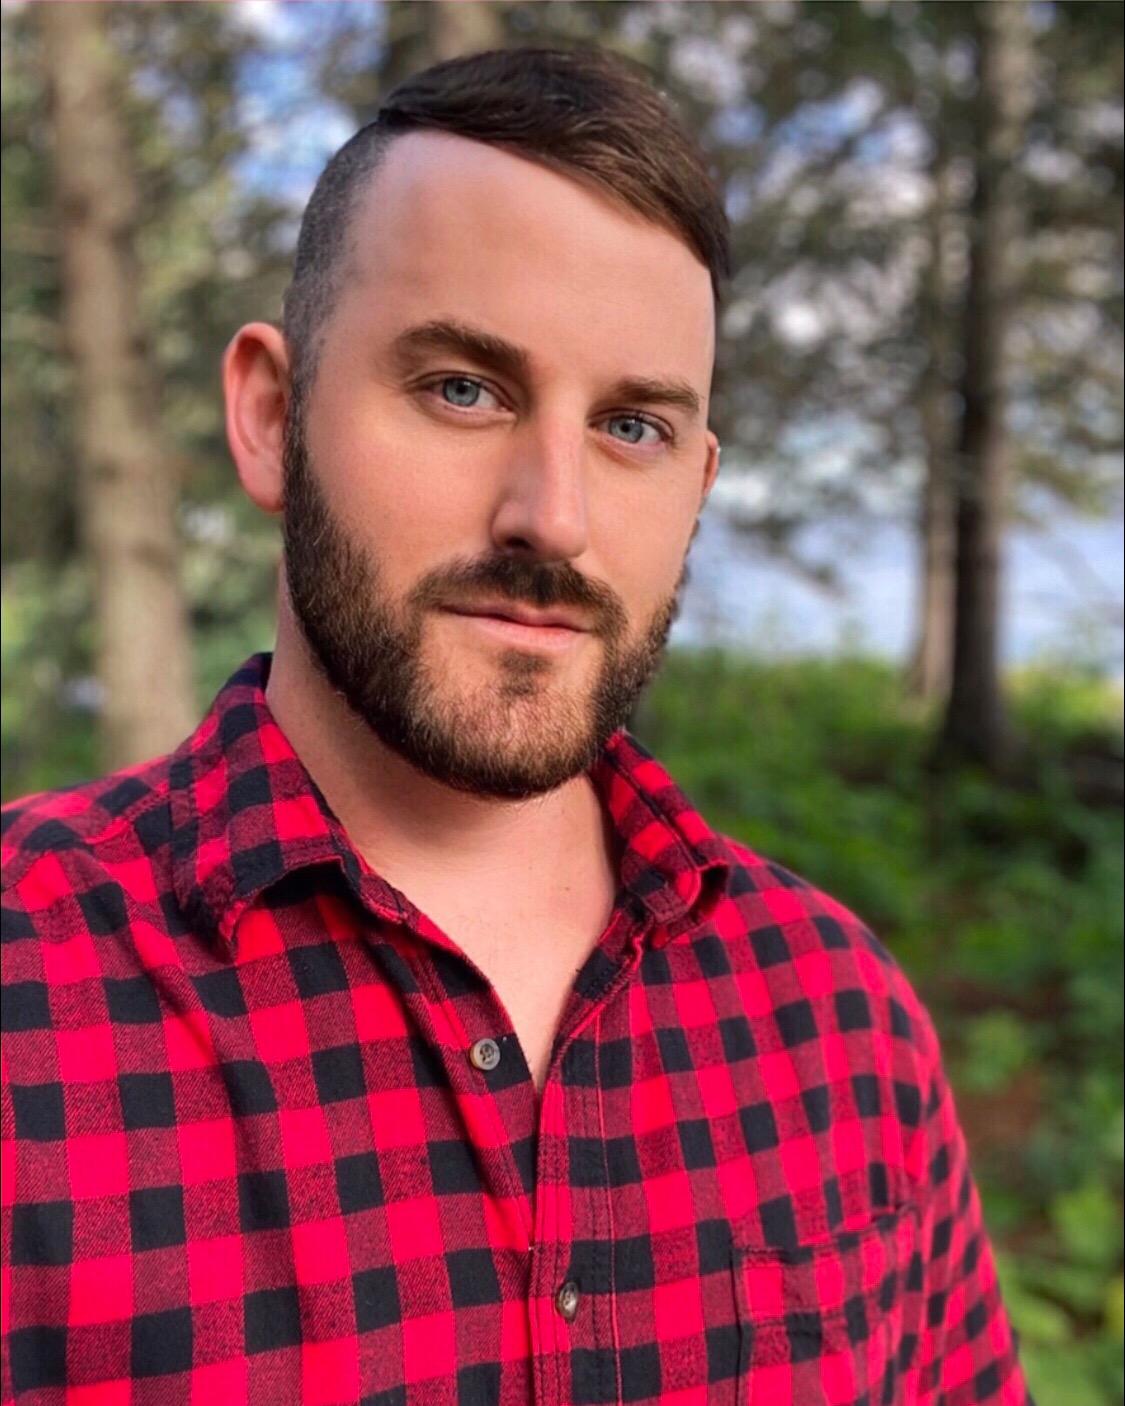 Jonathan has a short beard and connecting mustache. His hair is brown. He is wearing a red and navy blue flannel. His selfie was taken in the woods.